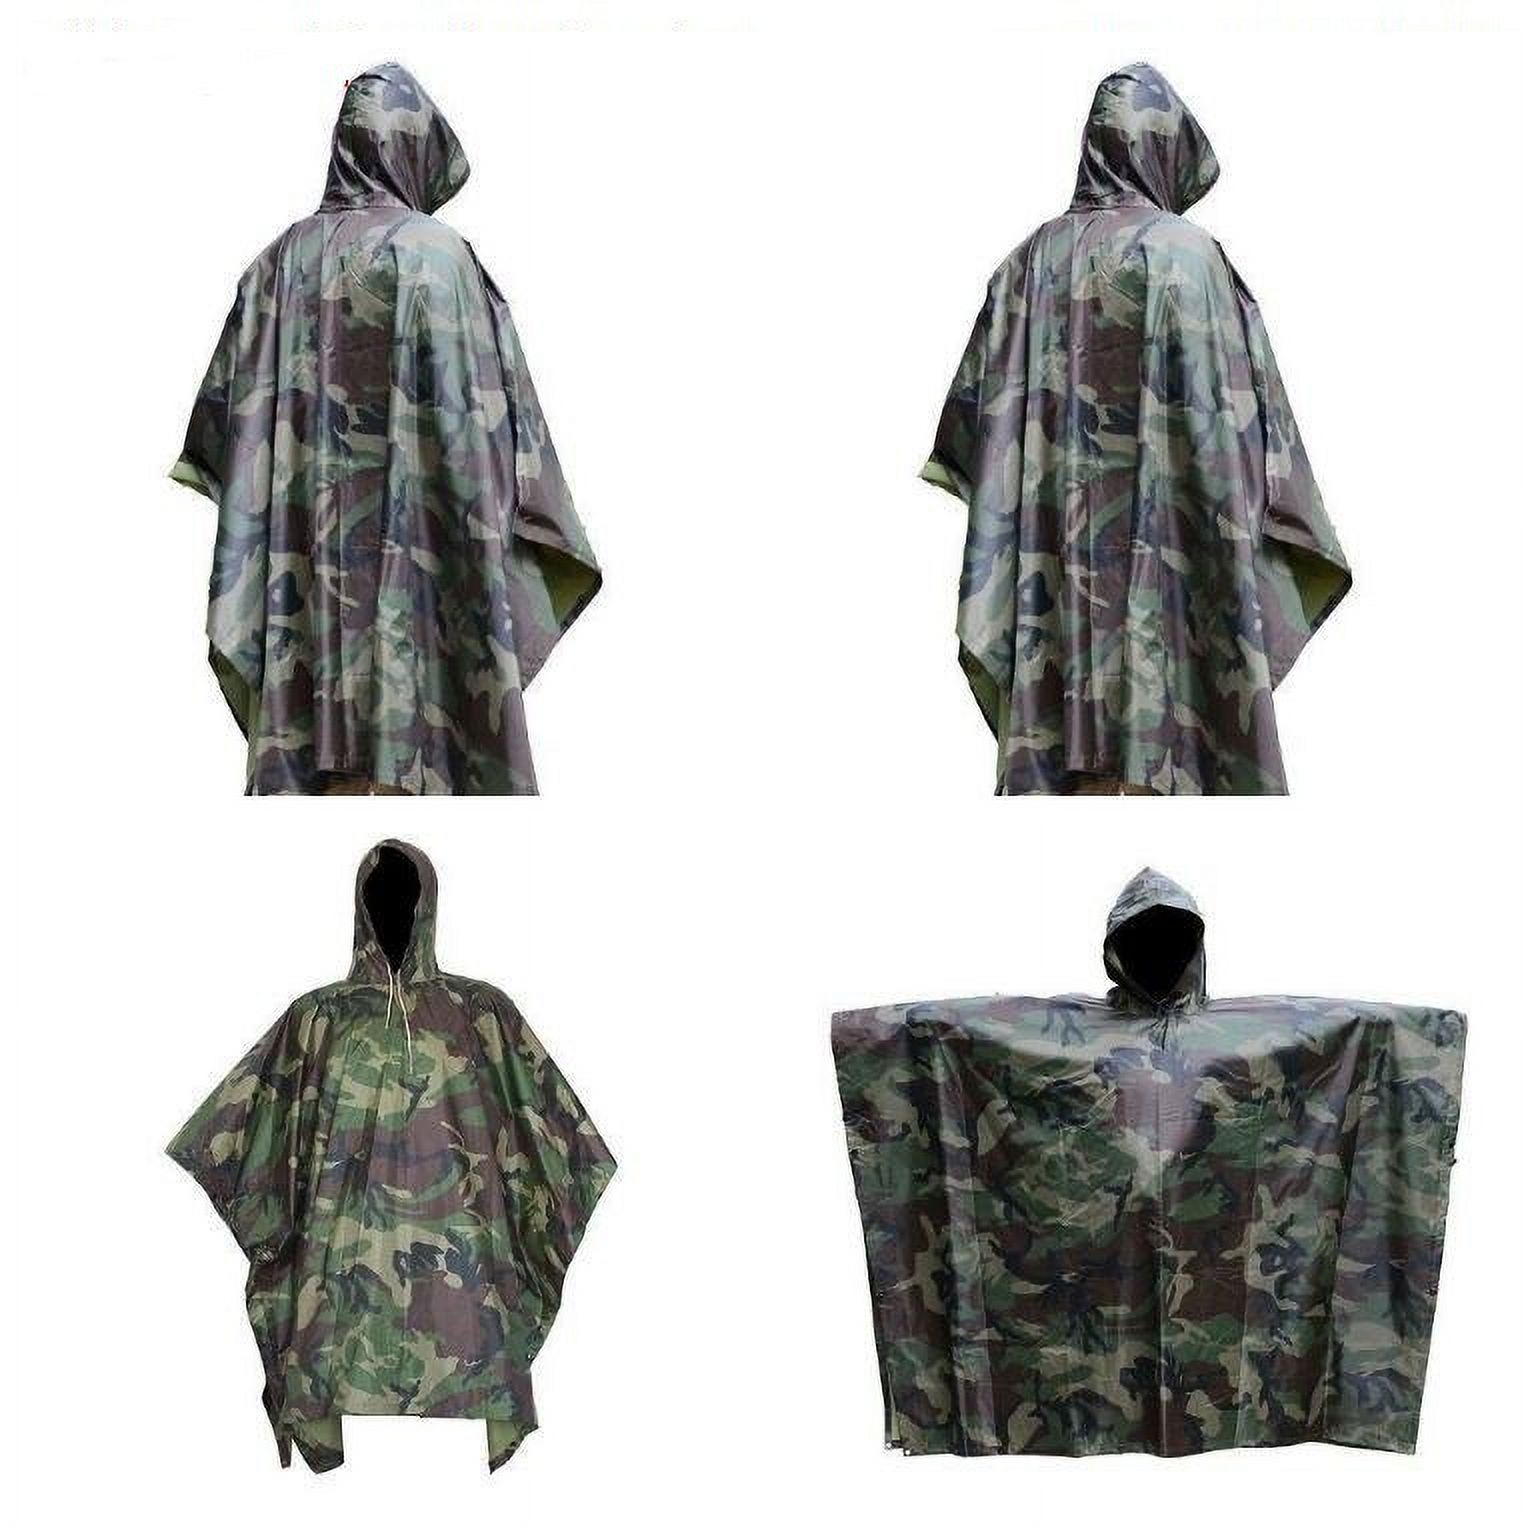 Army Combat Military Festival Poncho BTP Camo Waterproof Rain Cover Jacket - image 5 of 5